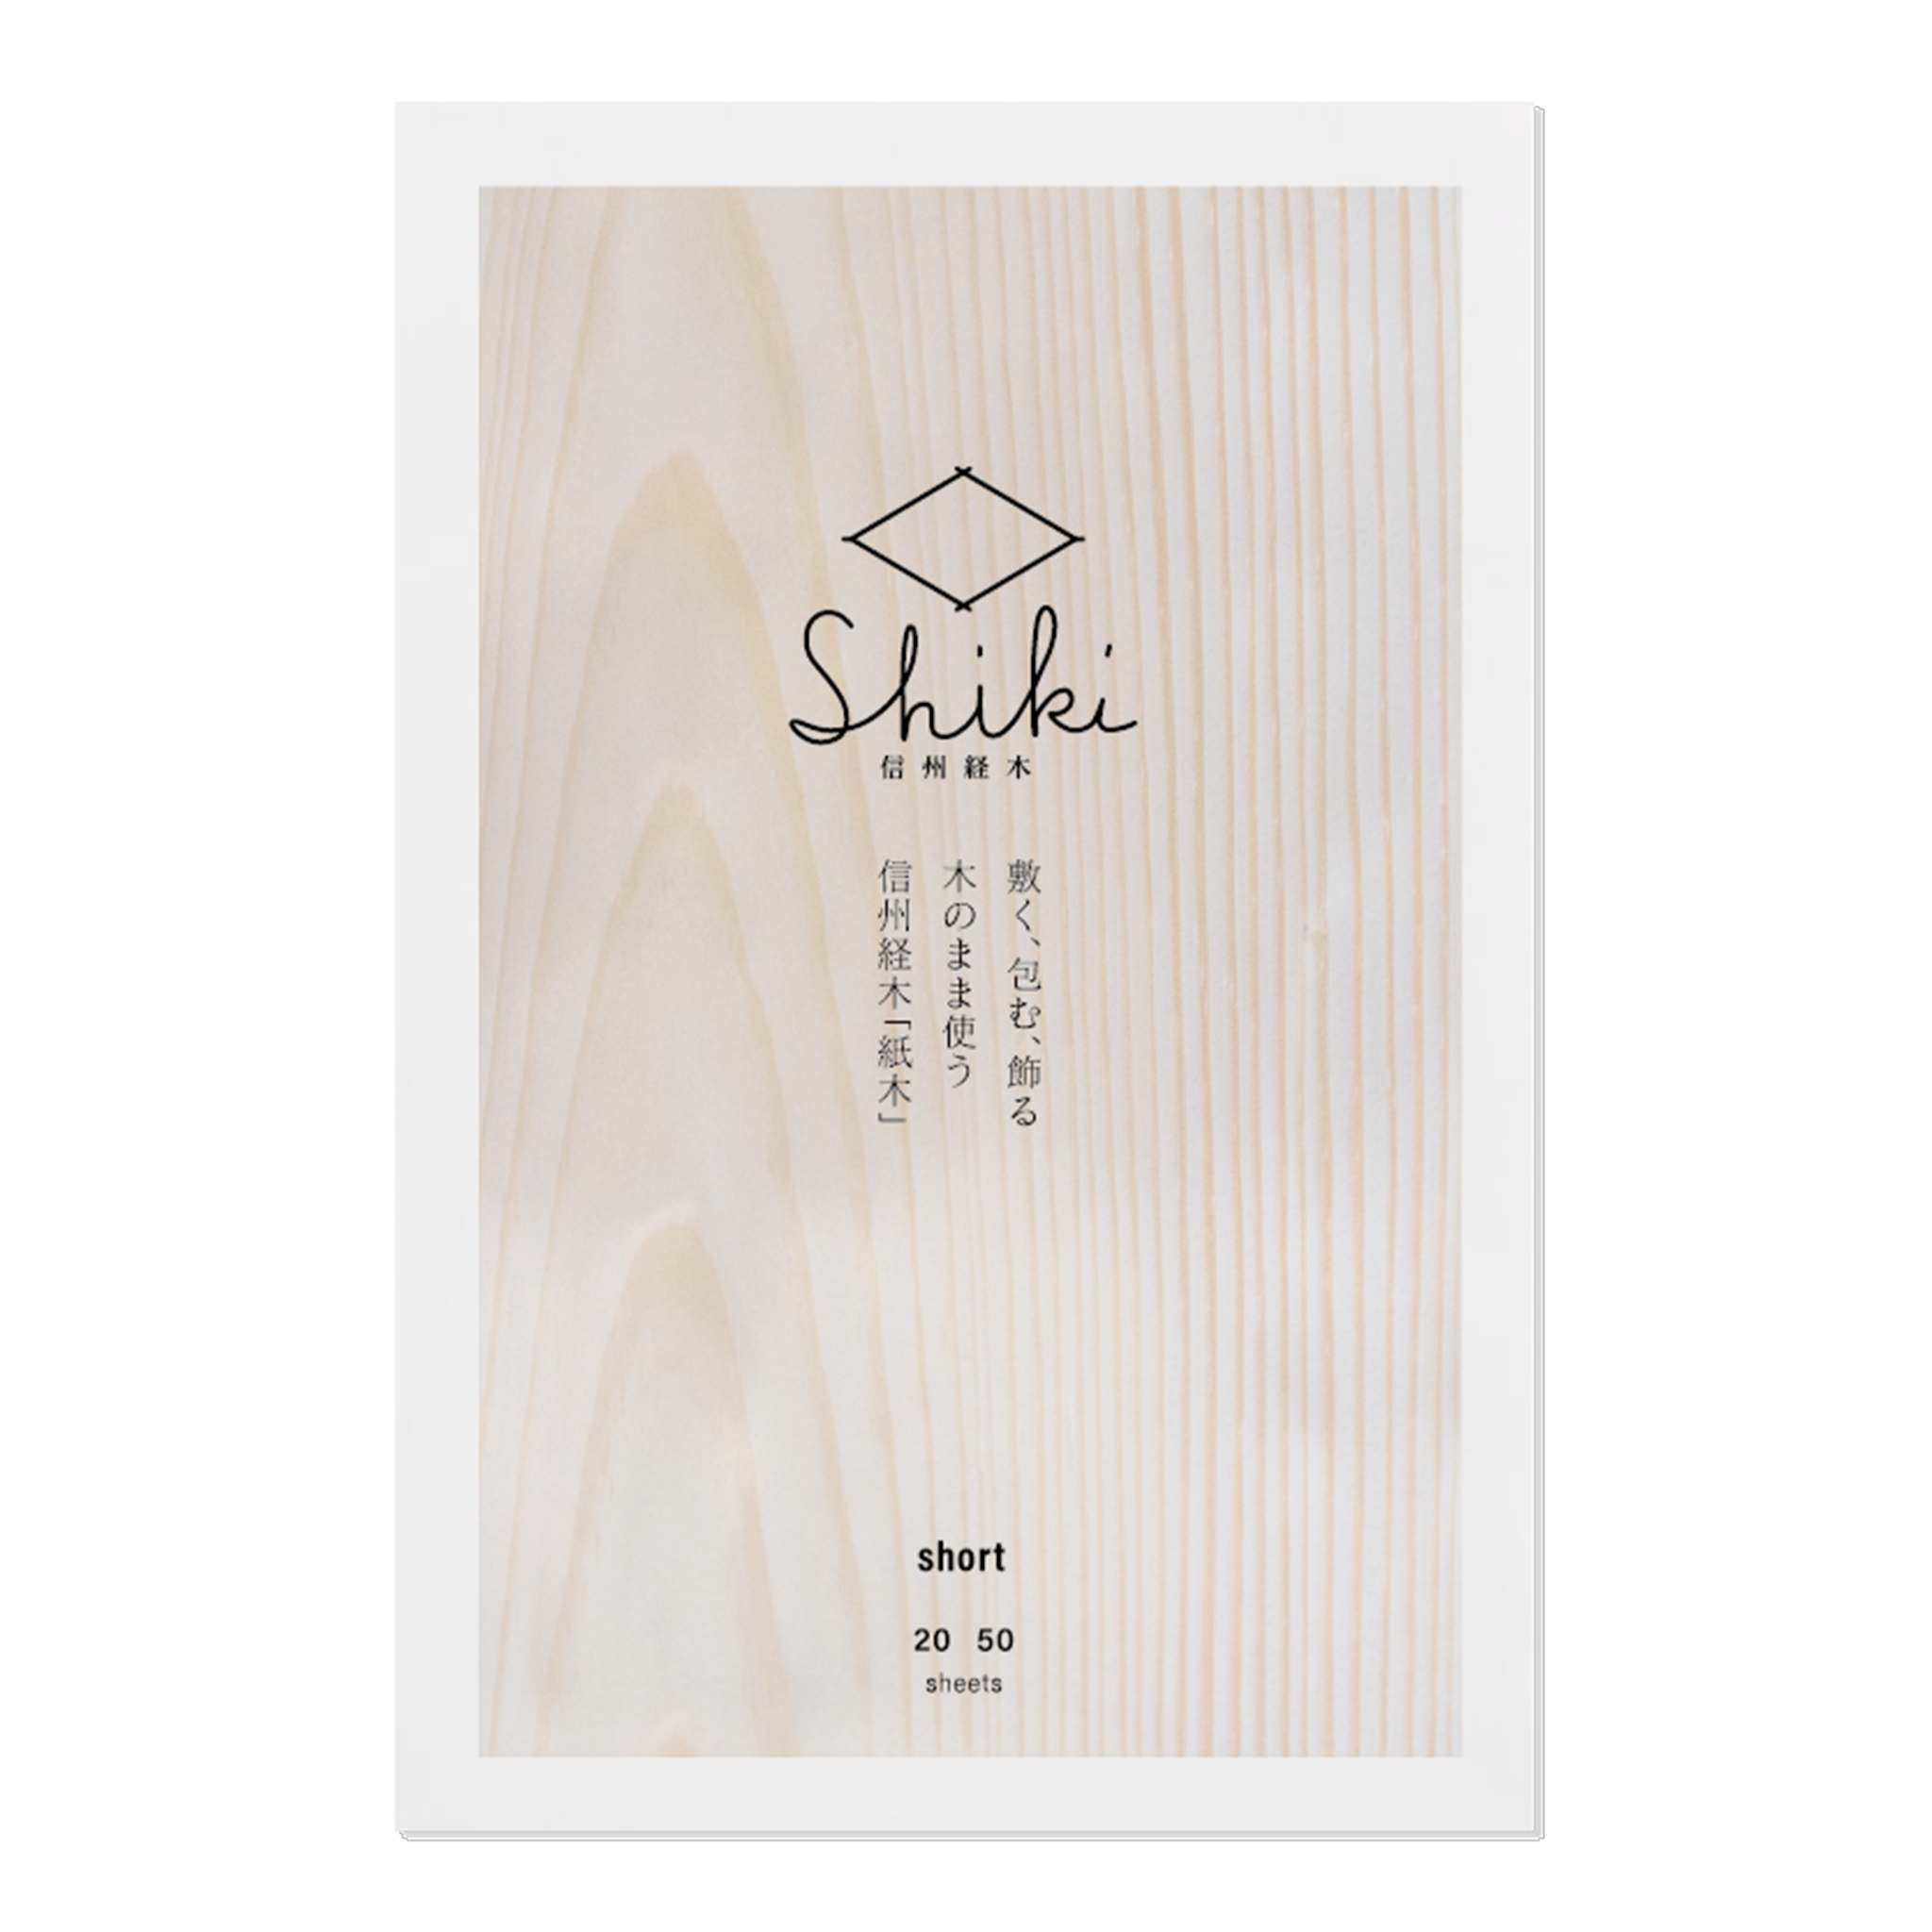 Wood Paper / Ultra Thin Wooden Kyougi Sheets From Japan / Stamp